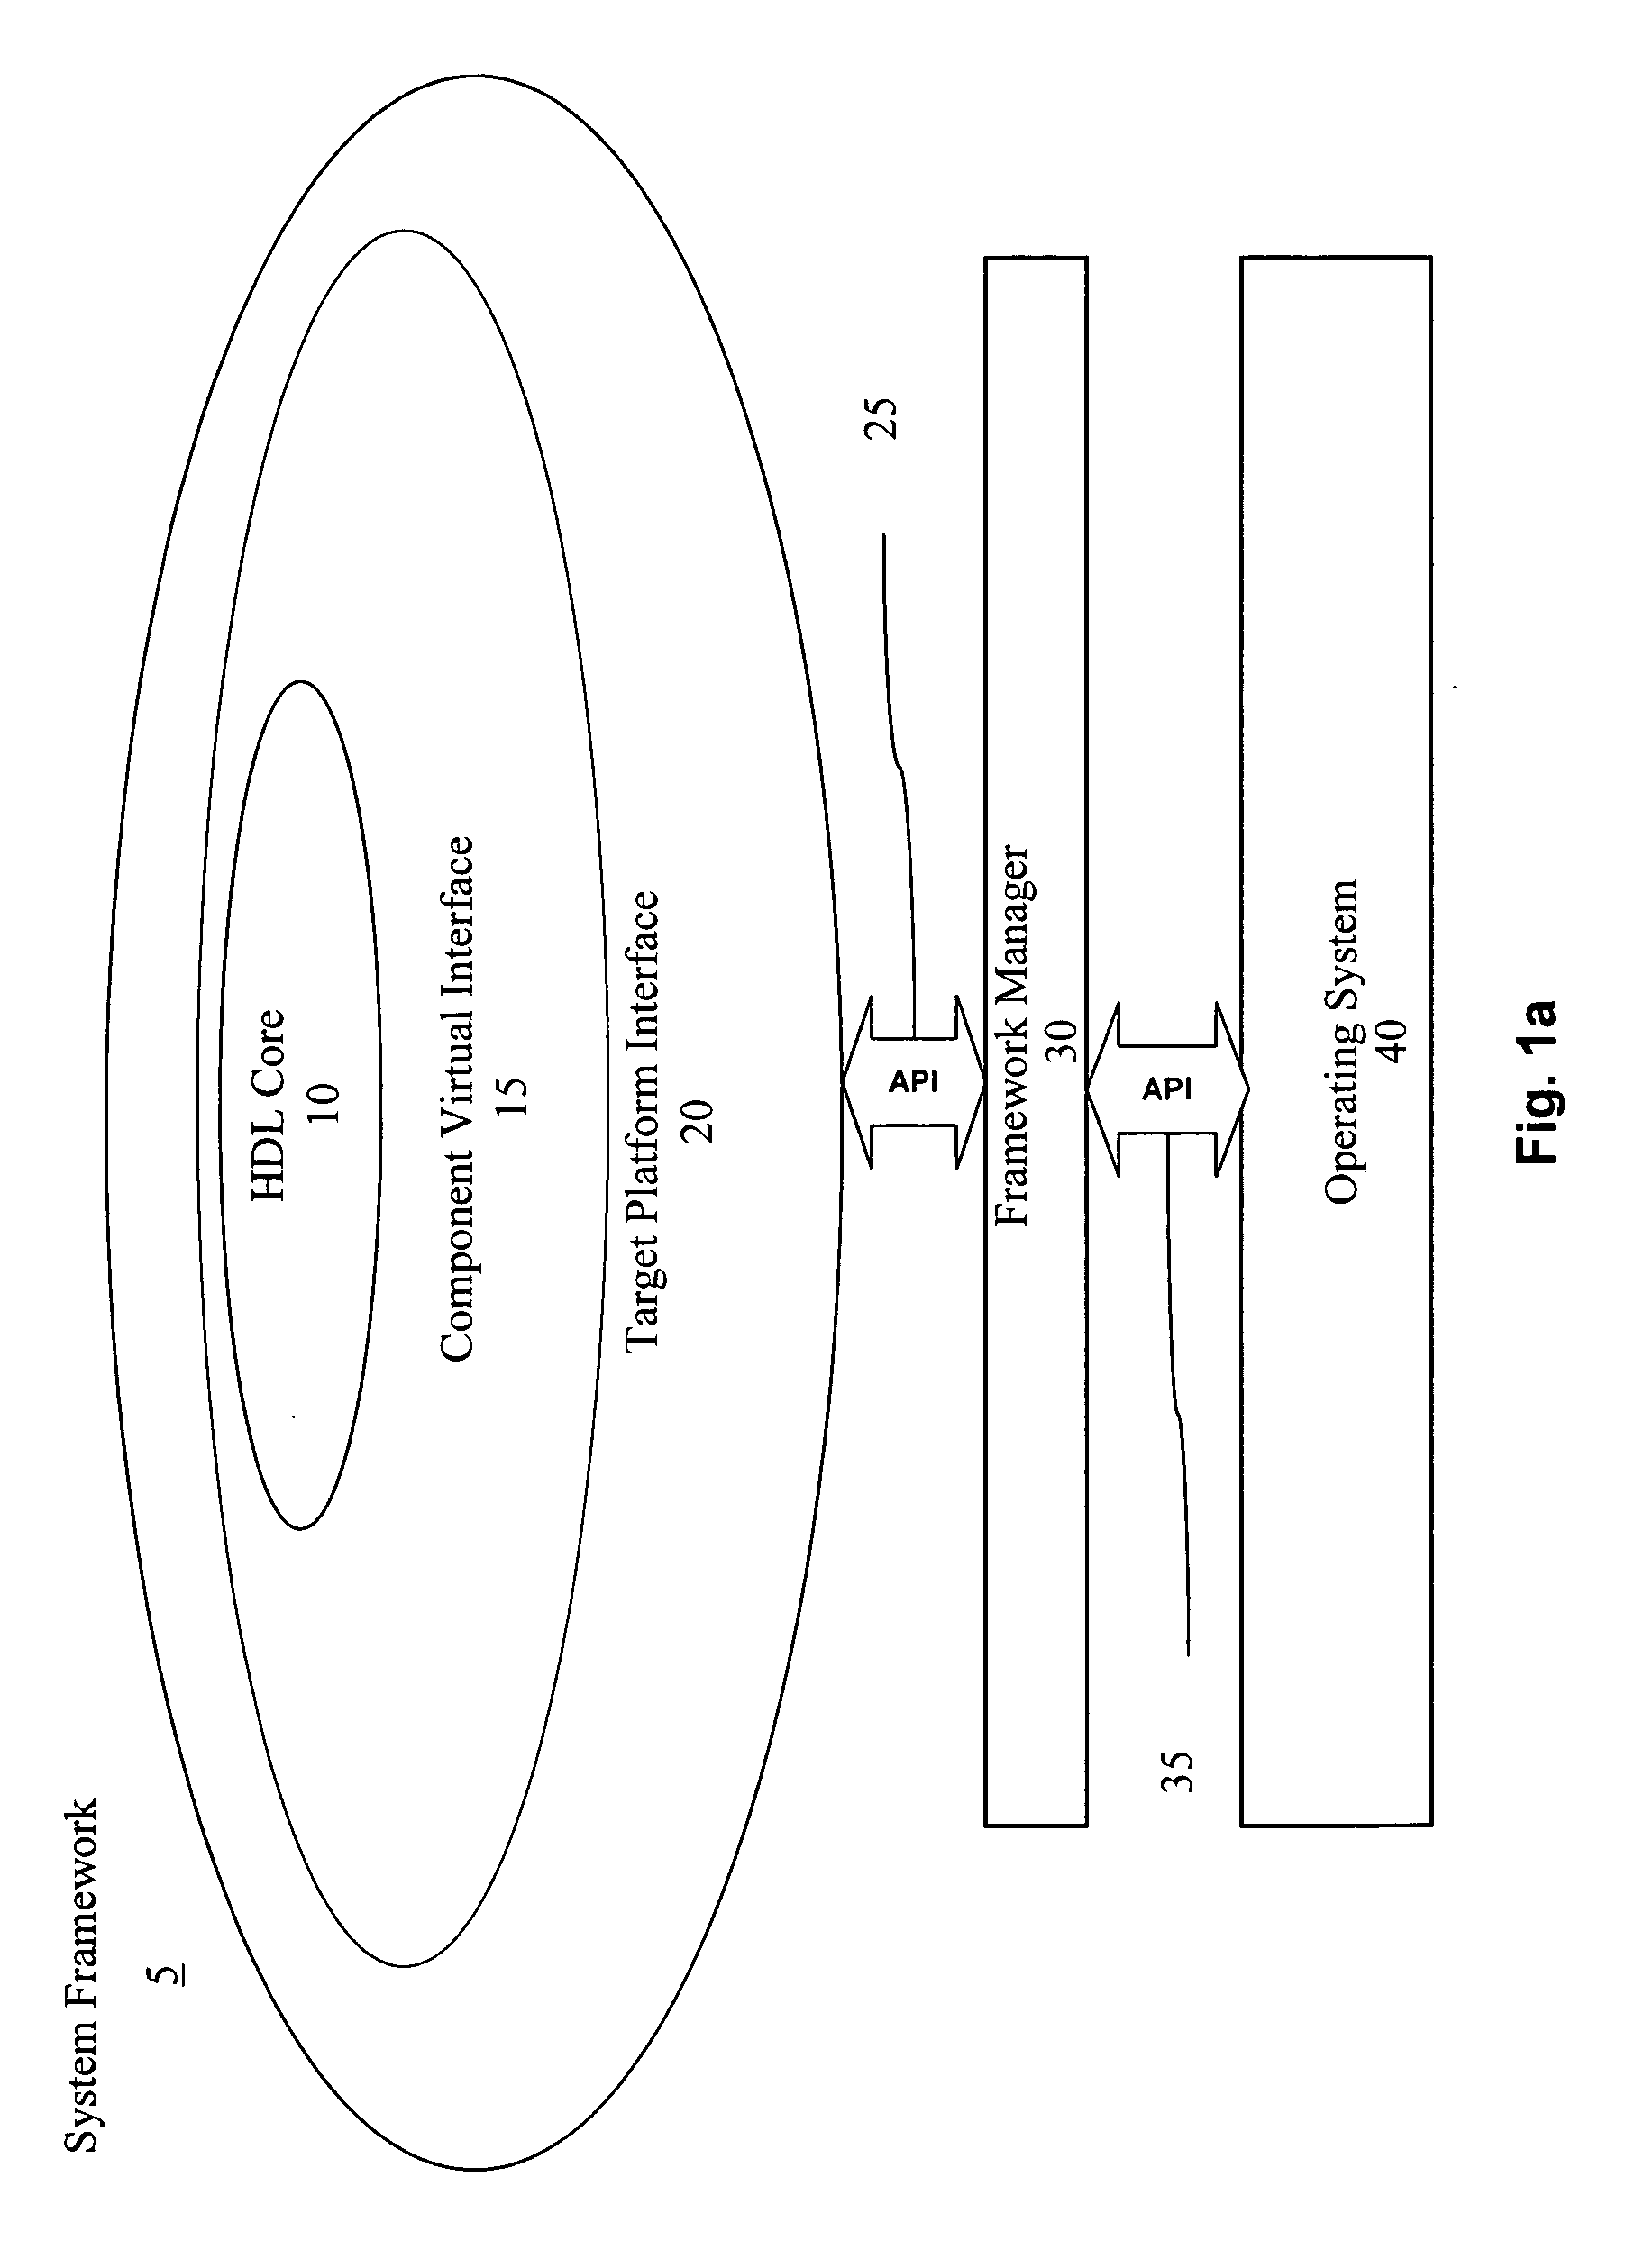 Common interface framework for developing field programmable device based applications independent of a target circuit board